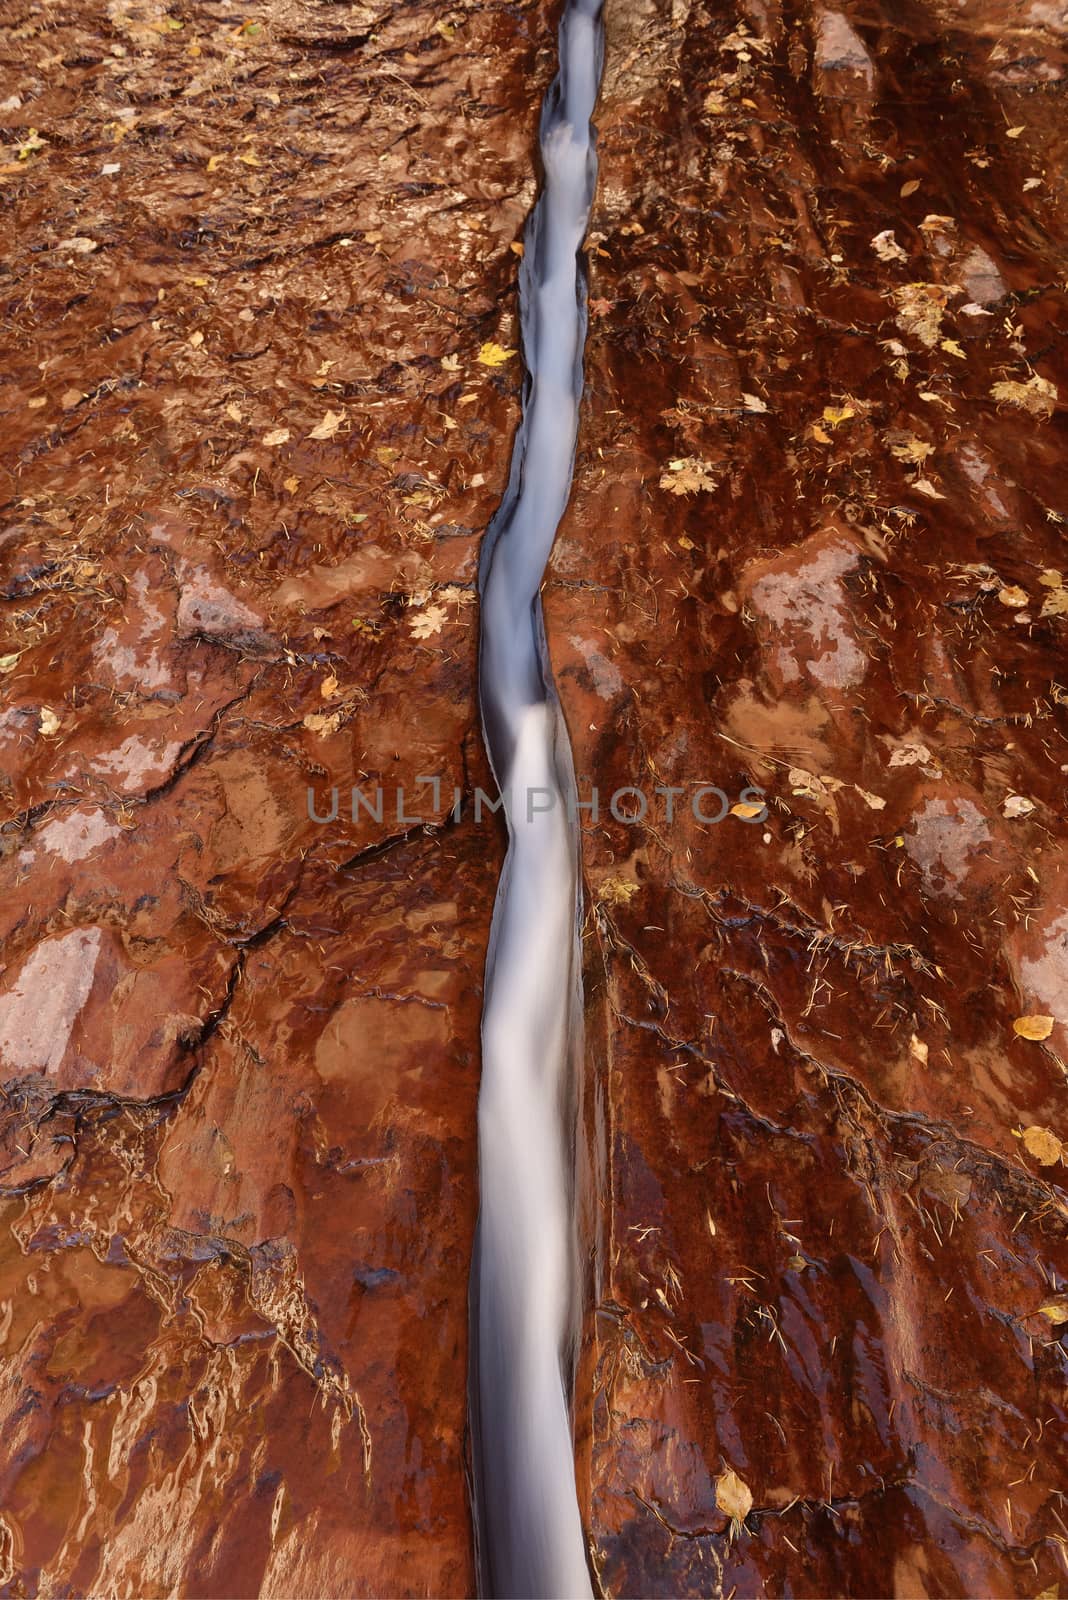 Water has cut a narrow channel in the red bedrock of the Left Fork North Creek, Zion National Park.